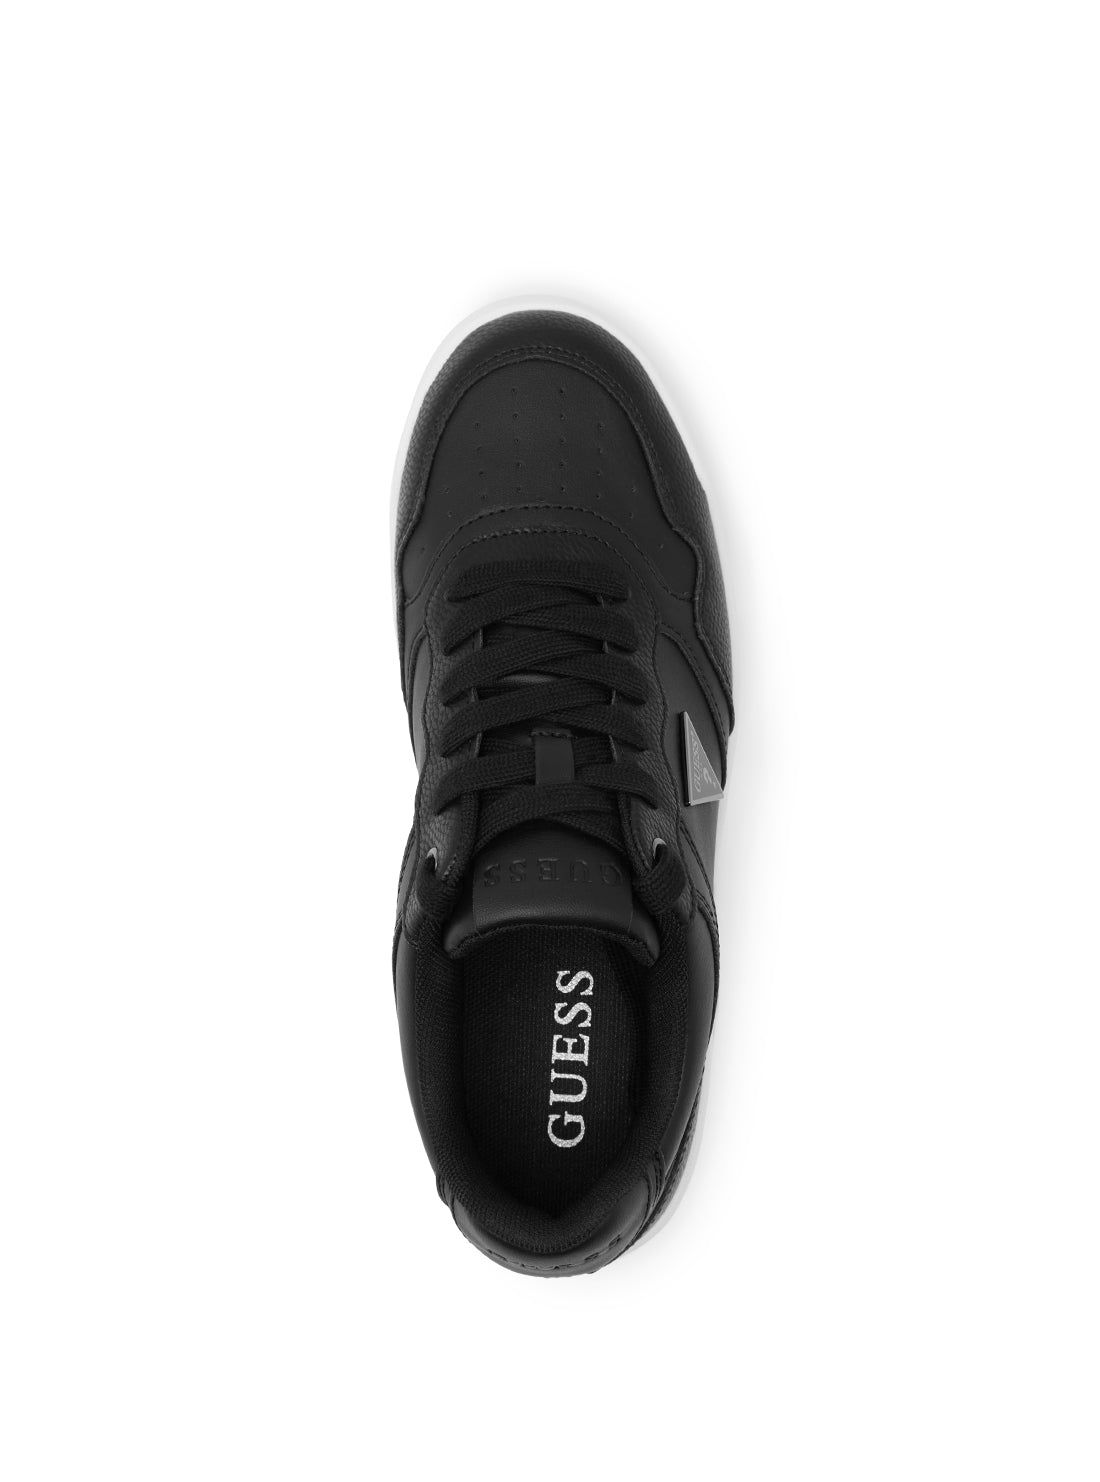 guess womens Black Miram Low-Top Sneakers front upper view